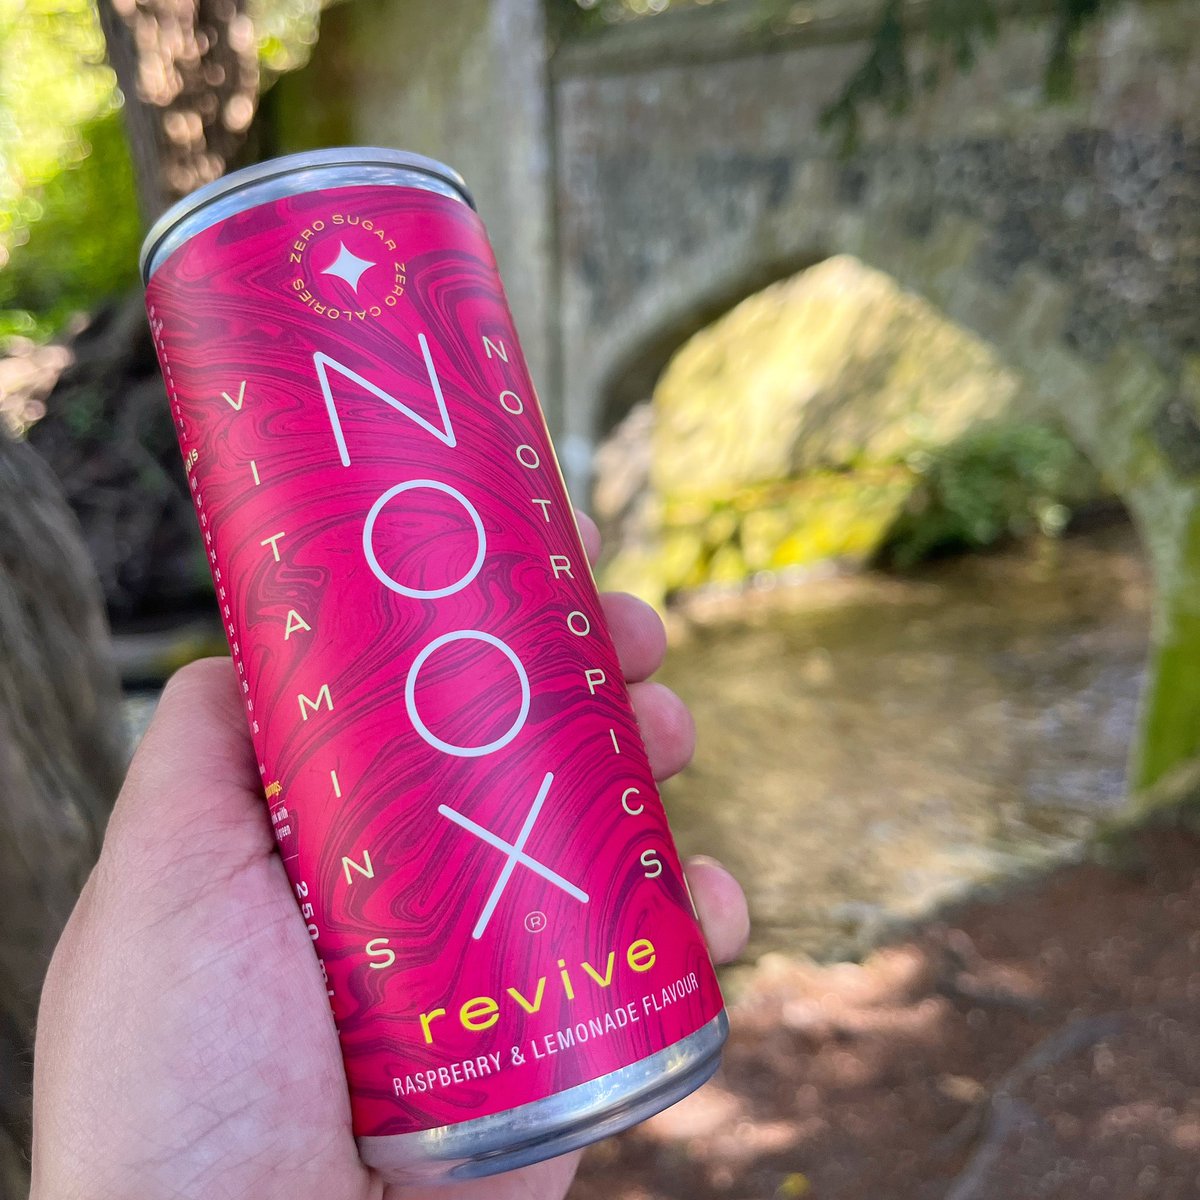 Unleash your zest for life with NOOX! 🌱🍋 Experience the ultimate feel good energy drink, blending raspberry and lemon flavors, as you explore the great outdoors. 🍋🍋🍋 #trendingreels #trendingvideo #OutdoorEnthusiast #AdventureSeeker #NatureLovers #ExploreNature